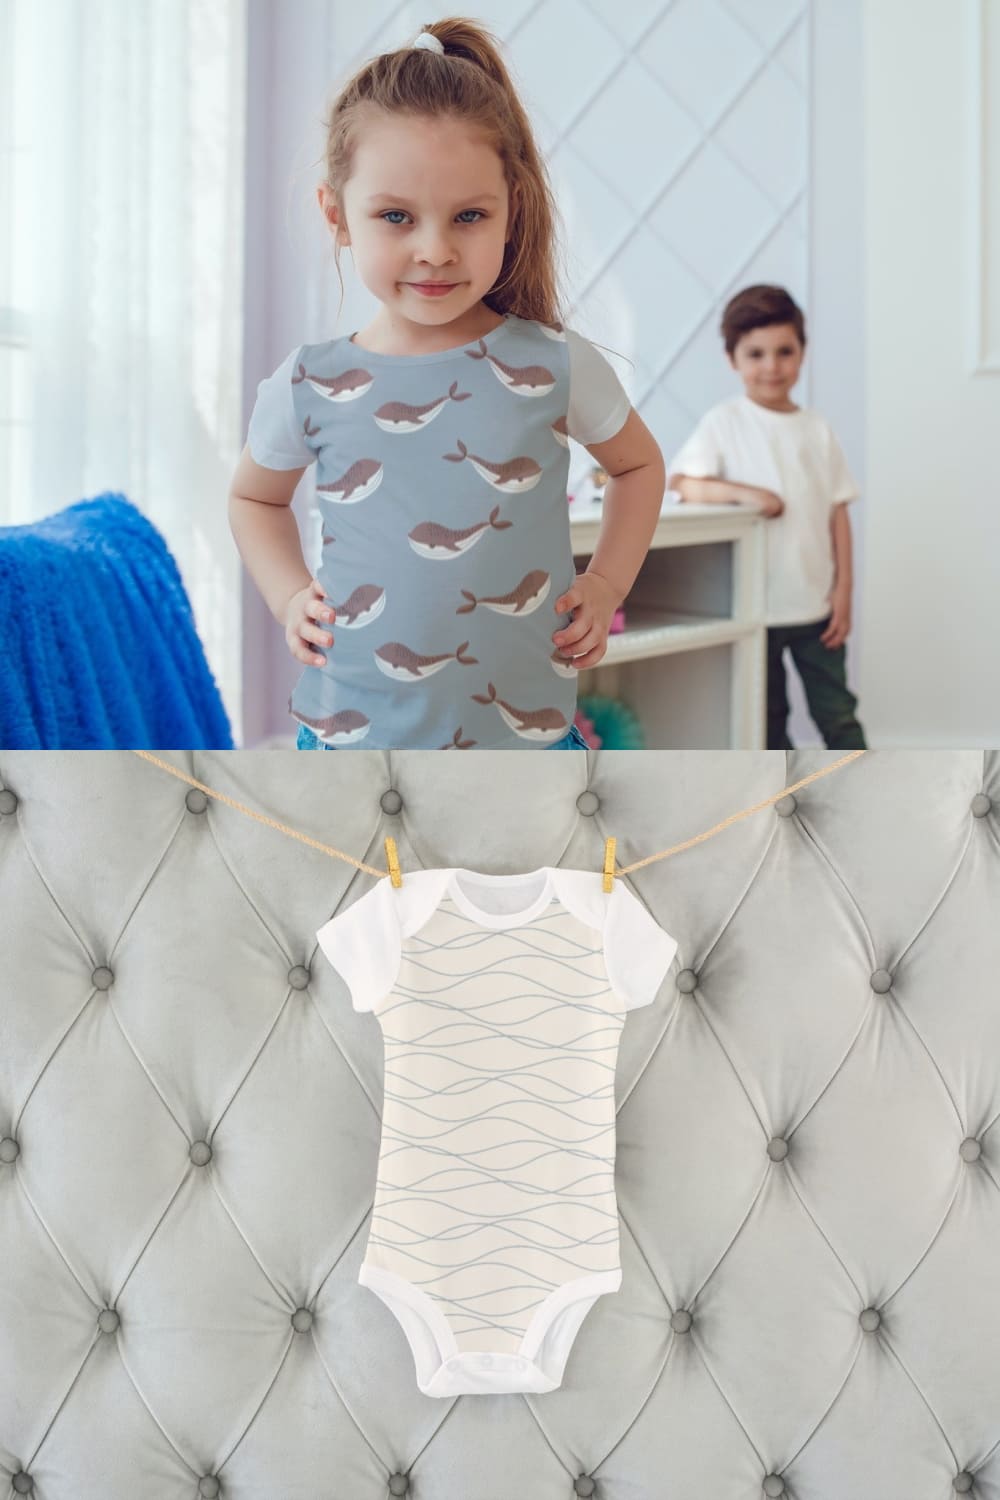 They are perfect for baby and kids apparel design.